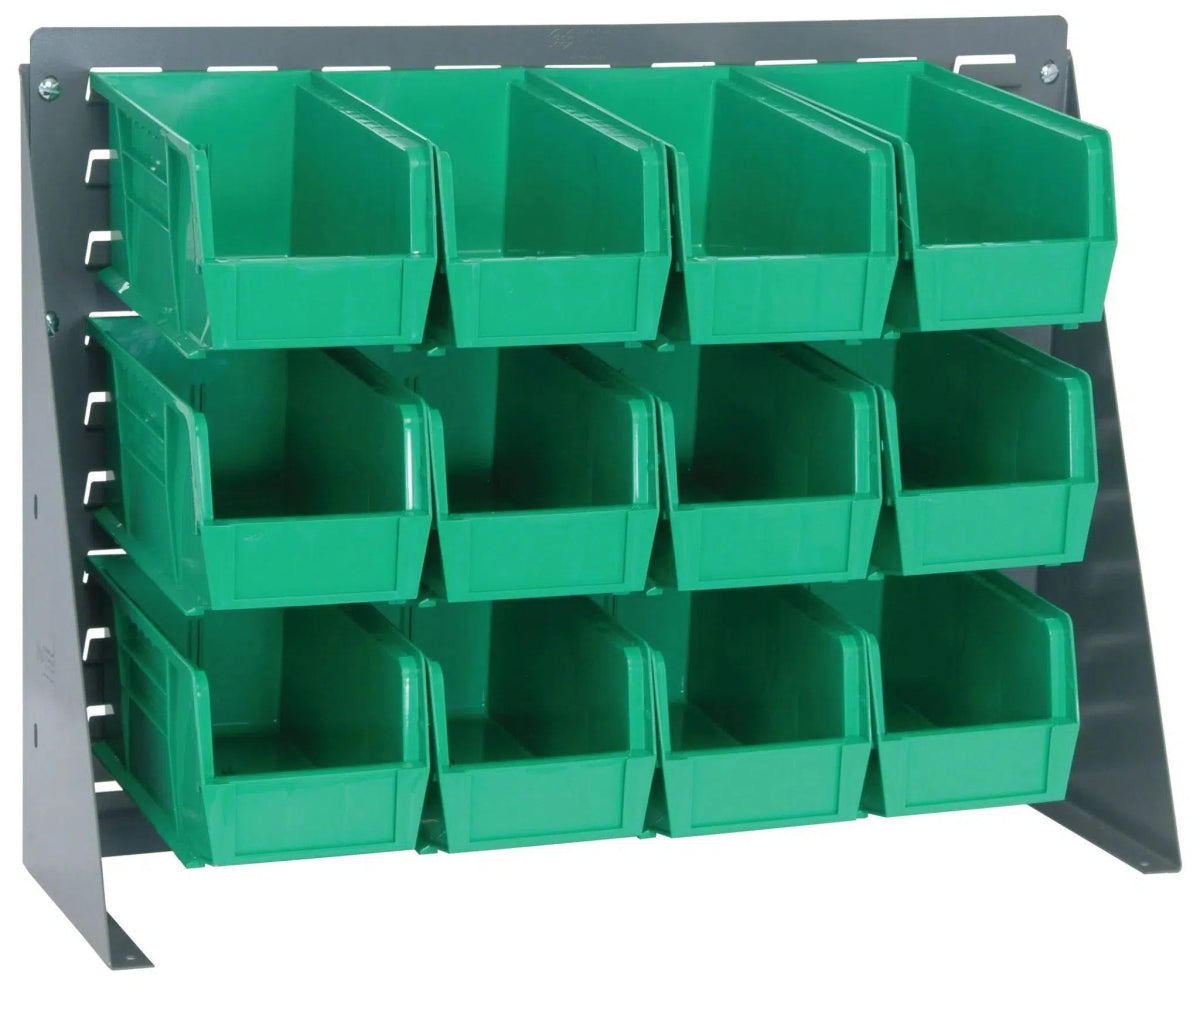 QBR-2721-230-12 | Bench Rack with 12 Hanging Bins - Industrial 4 Less - QBR-2721-230-12-GN